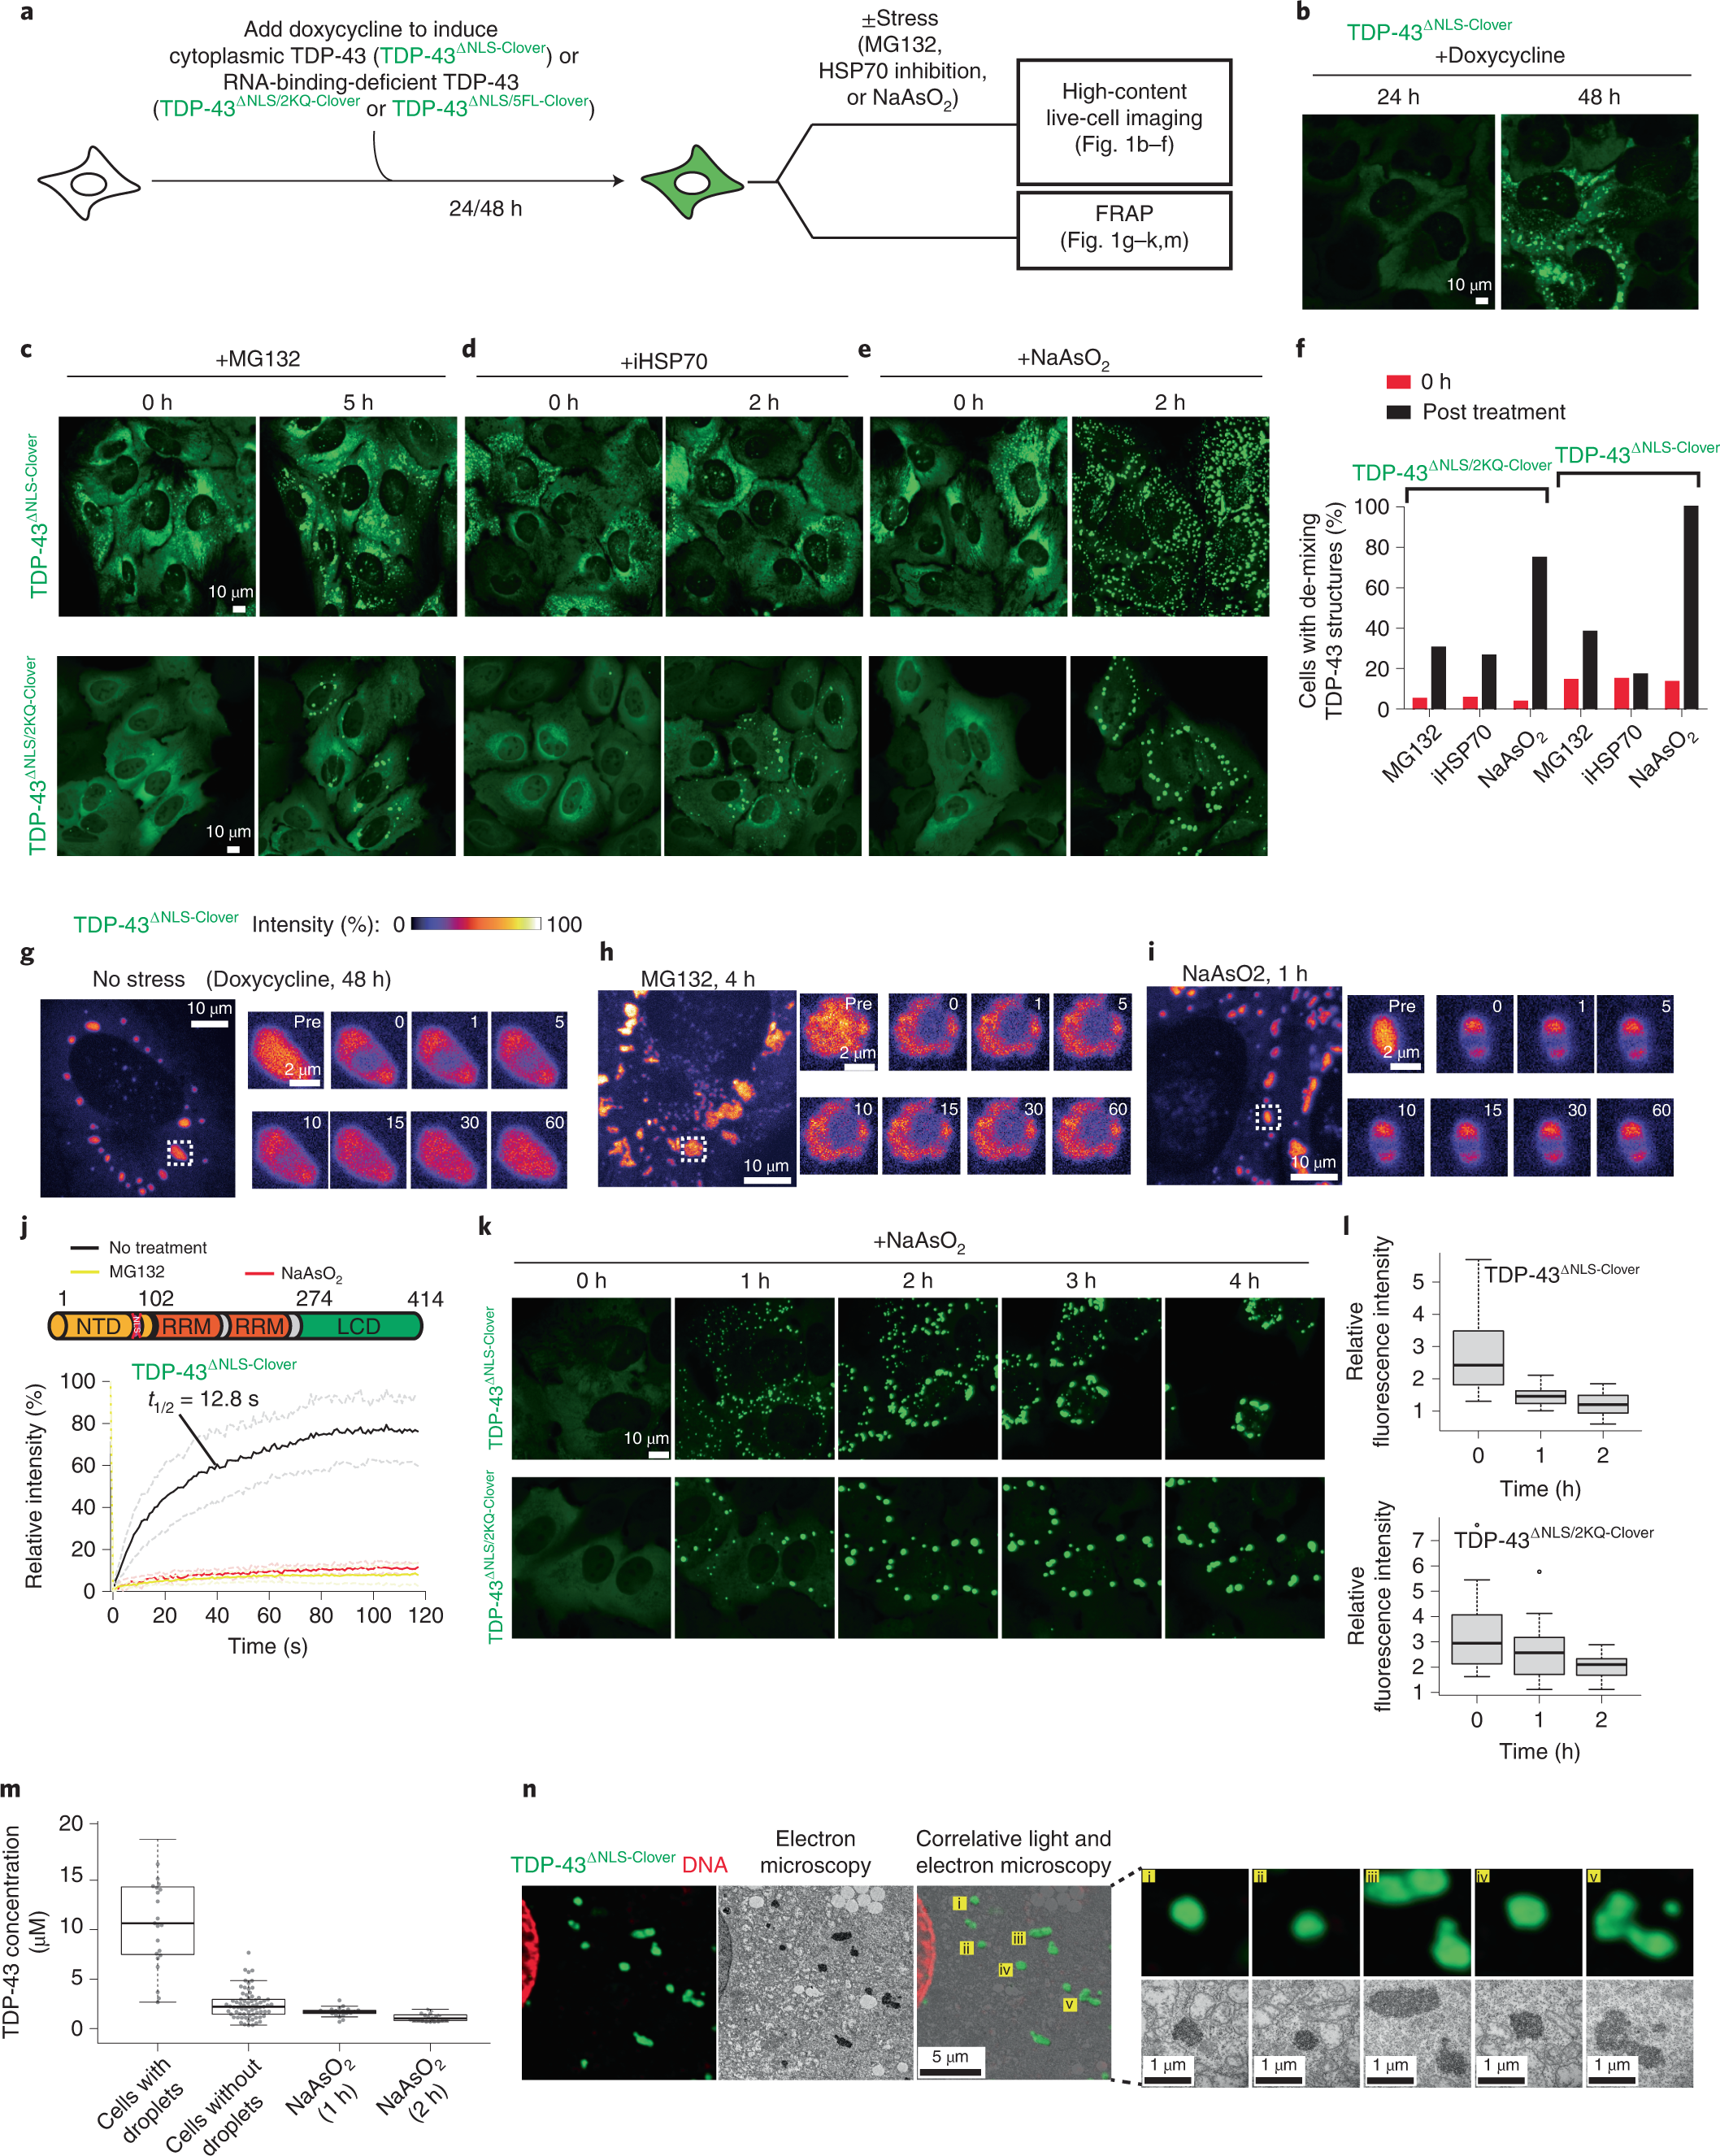 Heat-shock chaperone HSPB1 regulates cytoplasmic TDP-43 phase separation  and liquid-to-gel transition | Nature Cell Biology